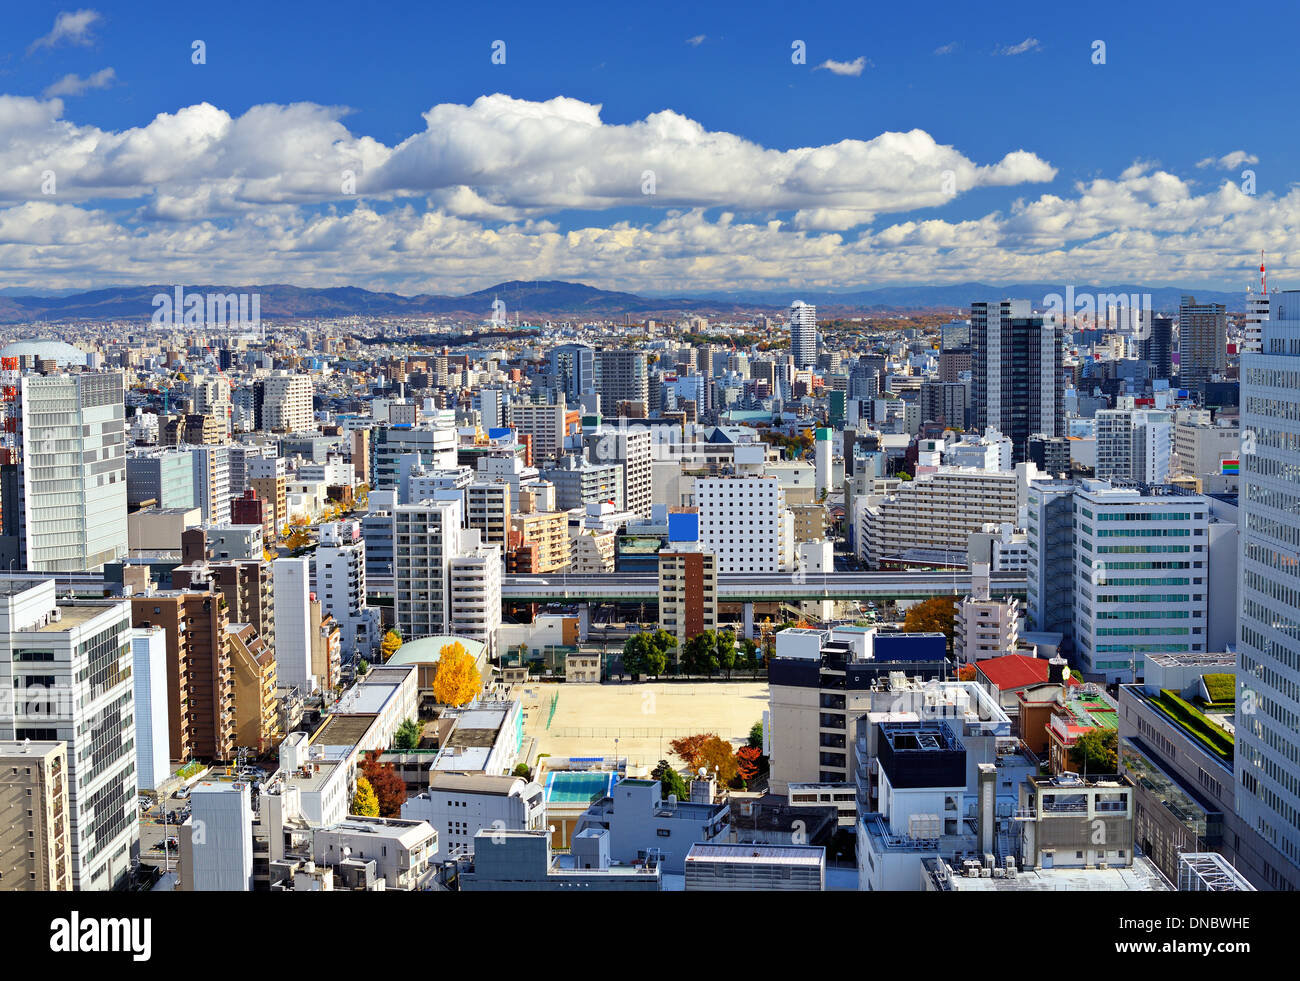 Nagoya, Japan cityscape in the day. Stock Photo